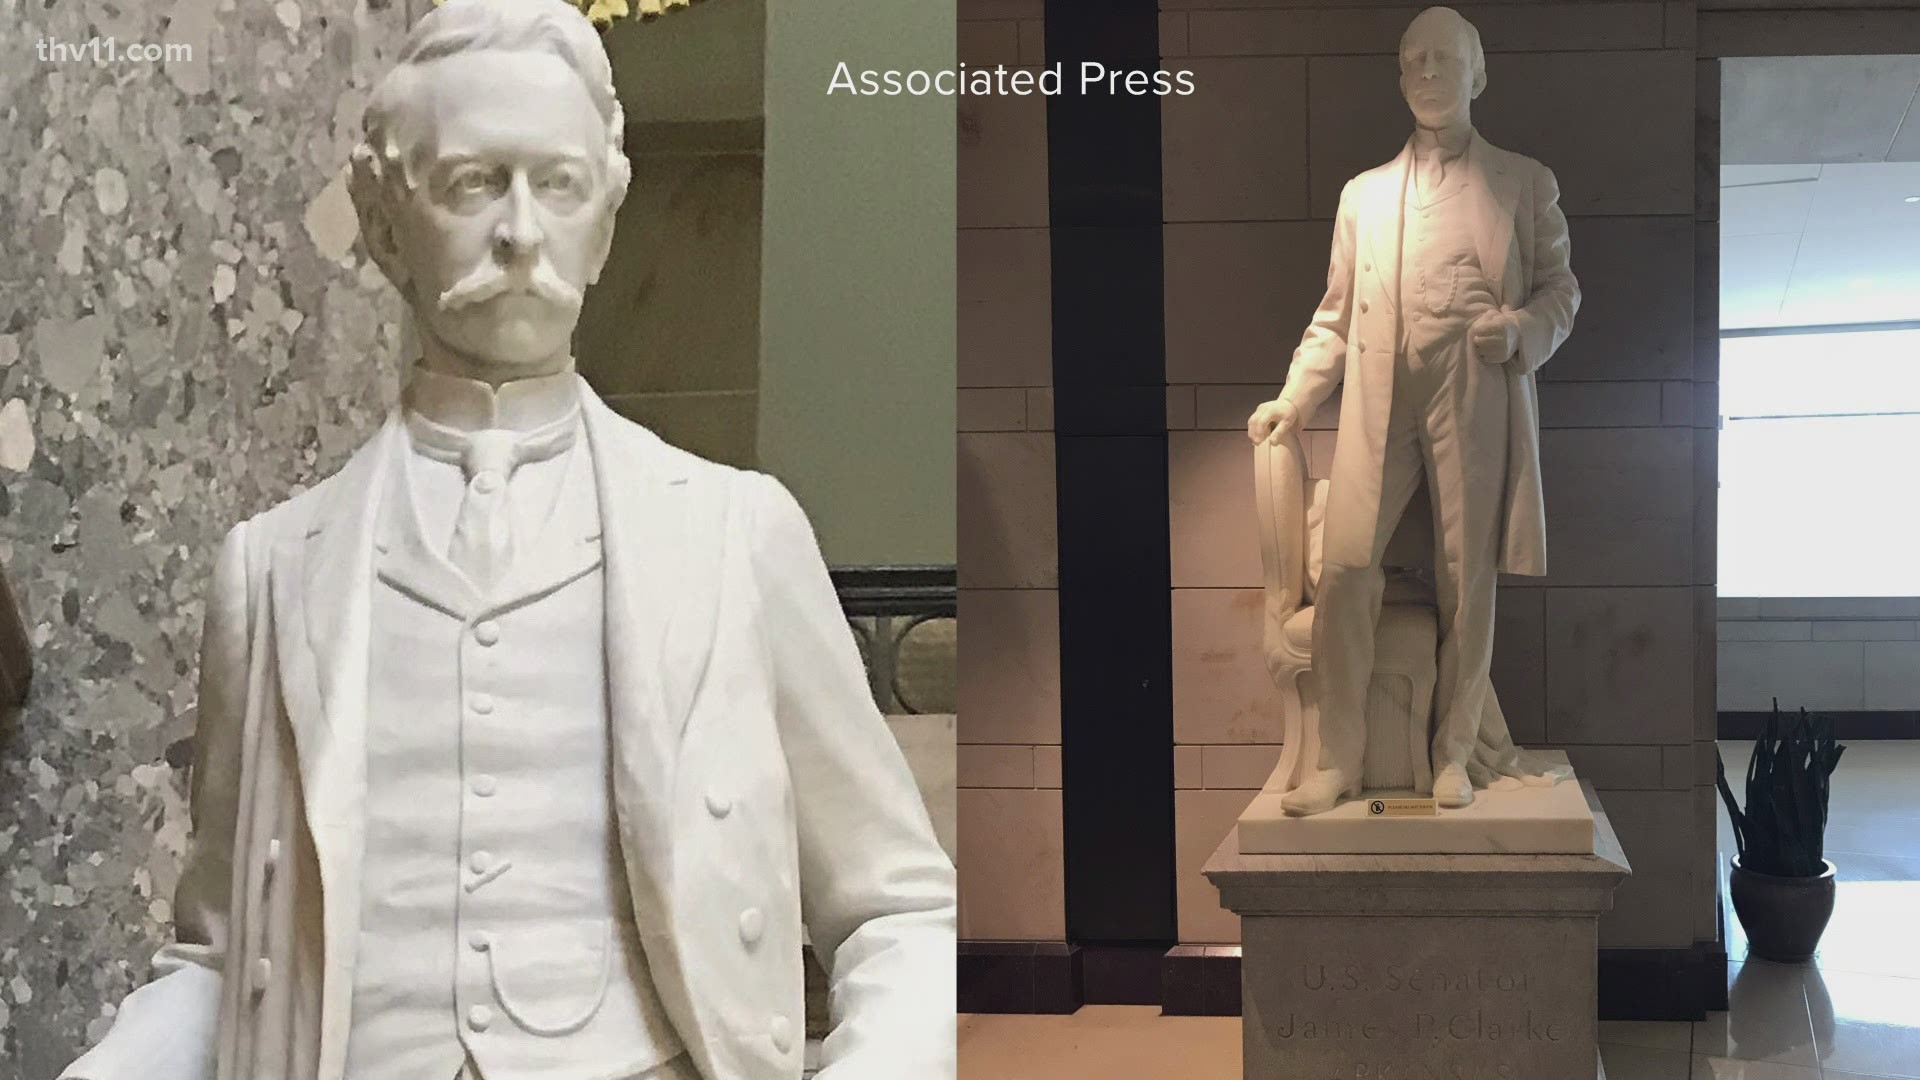 The early fundraising goals toward replacing Arkansas's statues in the National Statuary Hall in Washington D.C. have been met and exceeded.